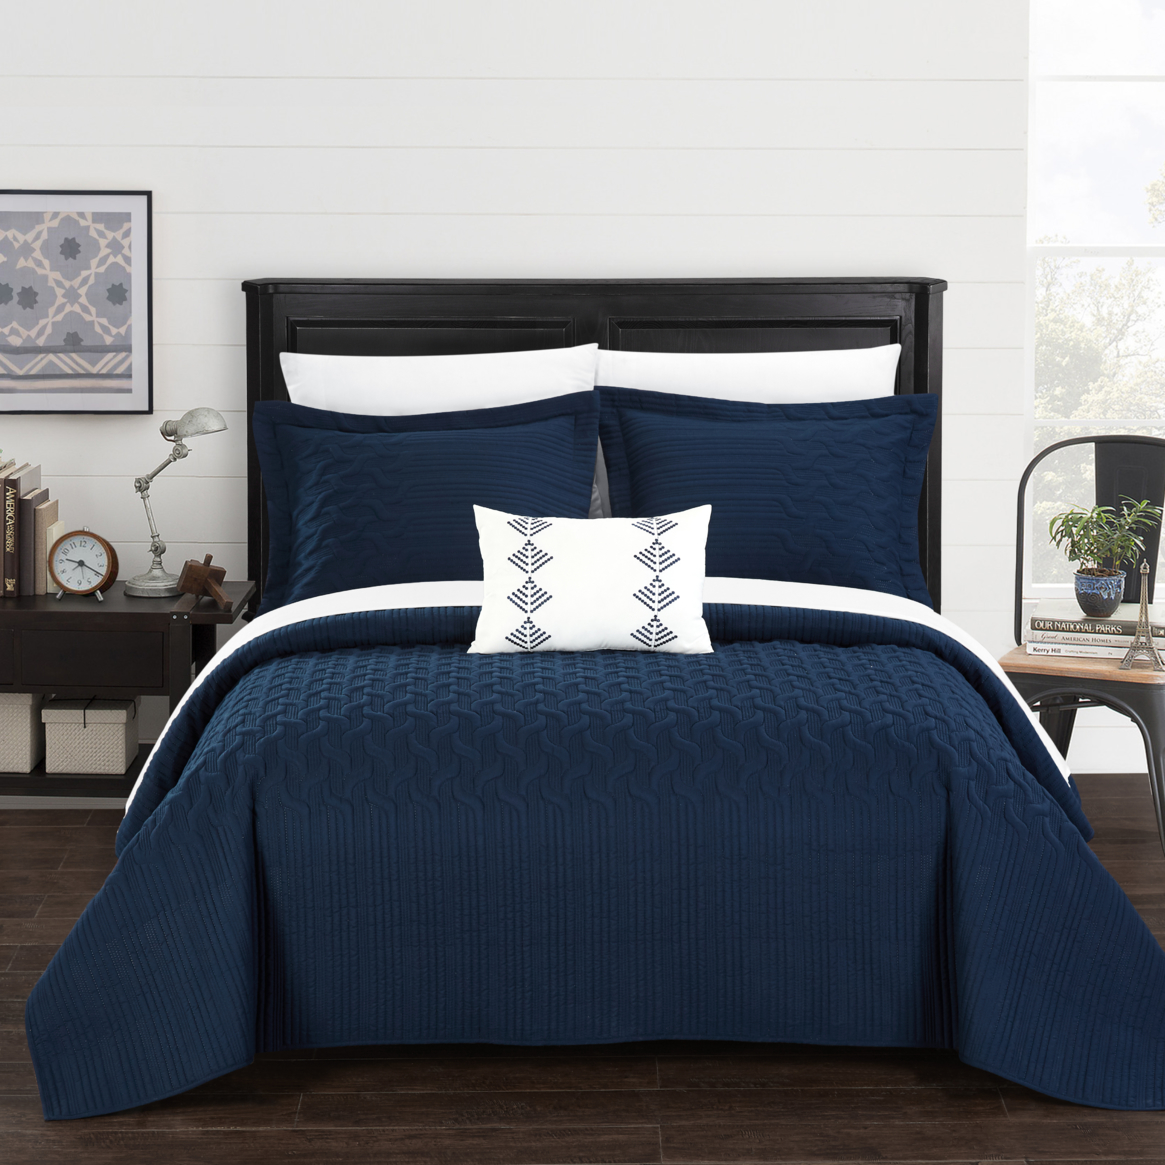 Shaliya 8 Or 6 Piece Quilt Cover Set Interlaced Vine Pattern Quilted Bed In A Bag - Navy, King